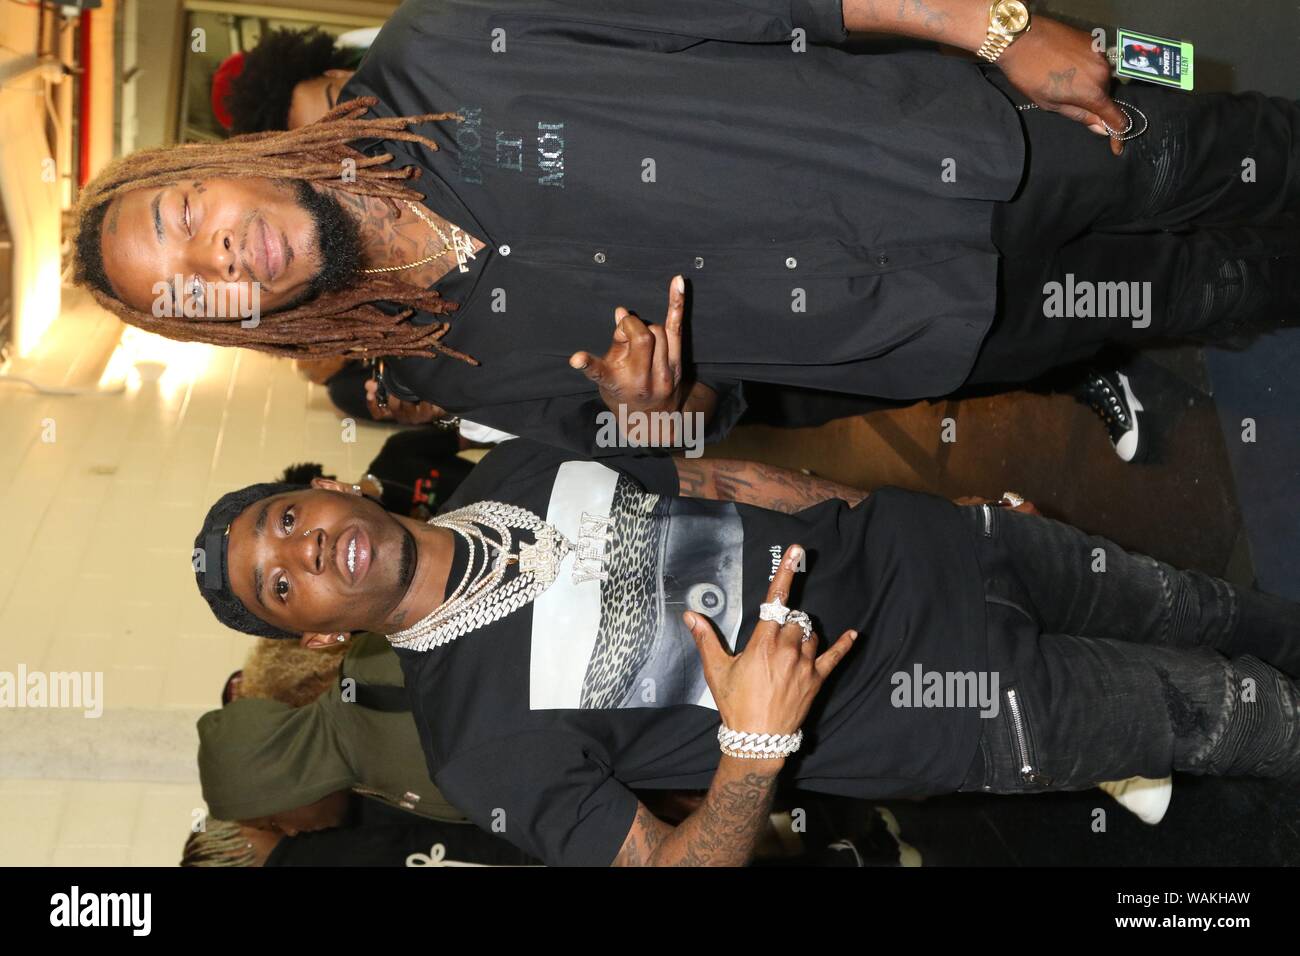 New York, NY, USA. 20th Aug, 2019. YFN Lucci & Fetty Wap backstage at the Power Season 6 Premiere August 20, 2019 at Madison Square Garden in New York City. Photo Credit: Walik Goshorn/Mediapunch/Alamy Live News Stock Photo